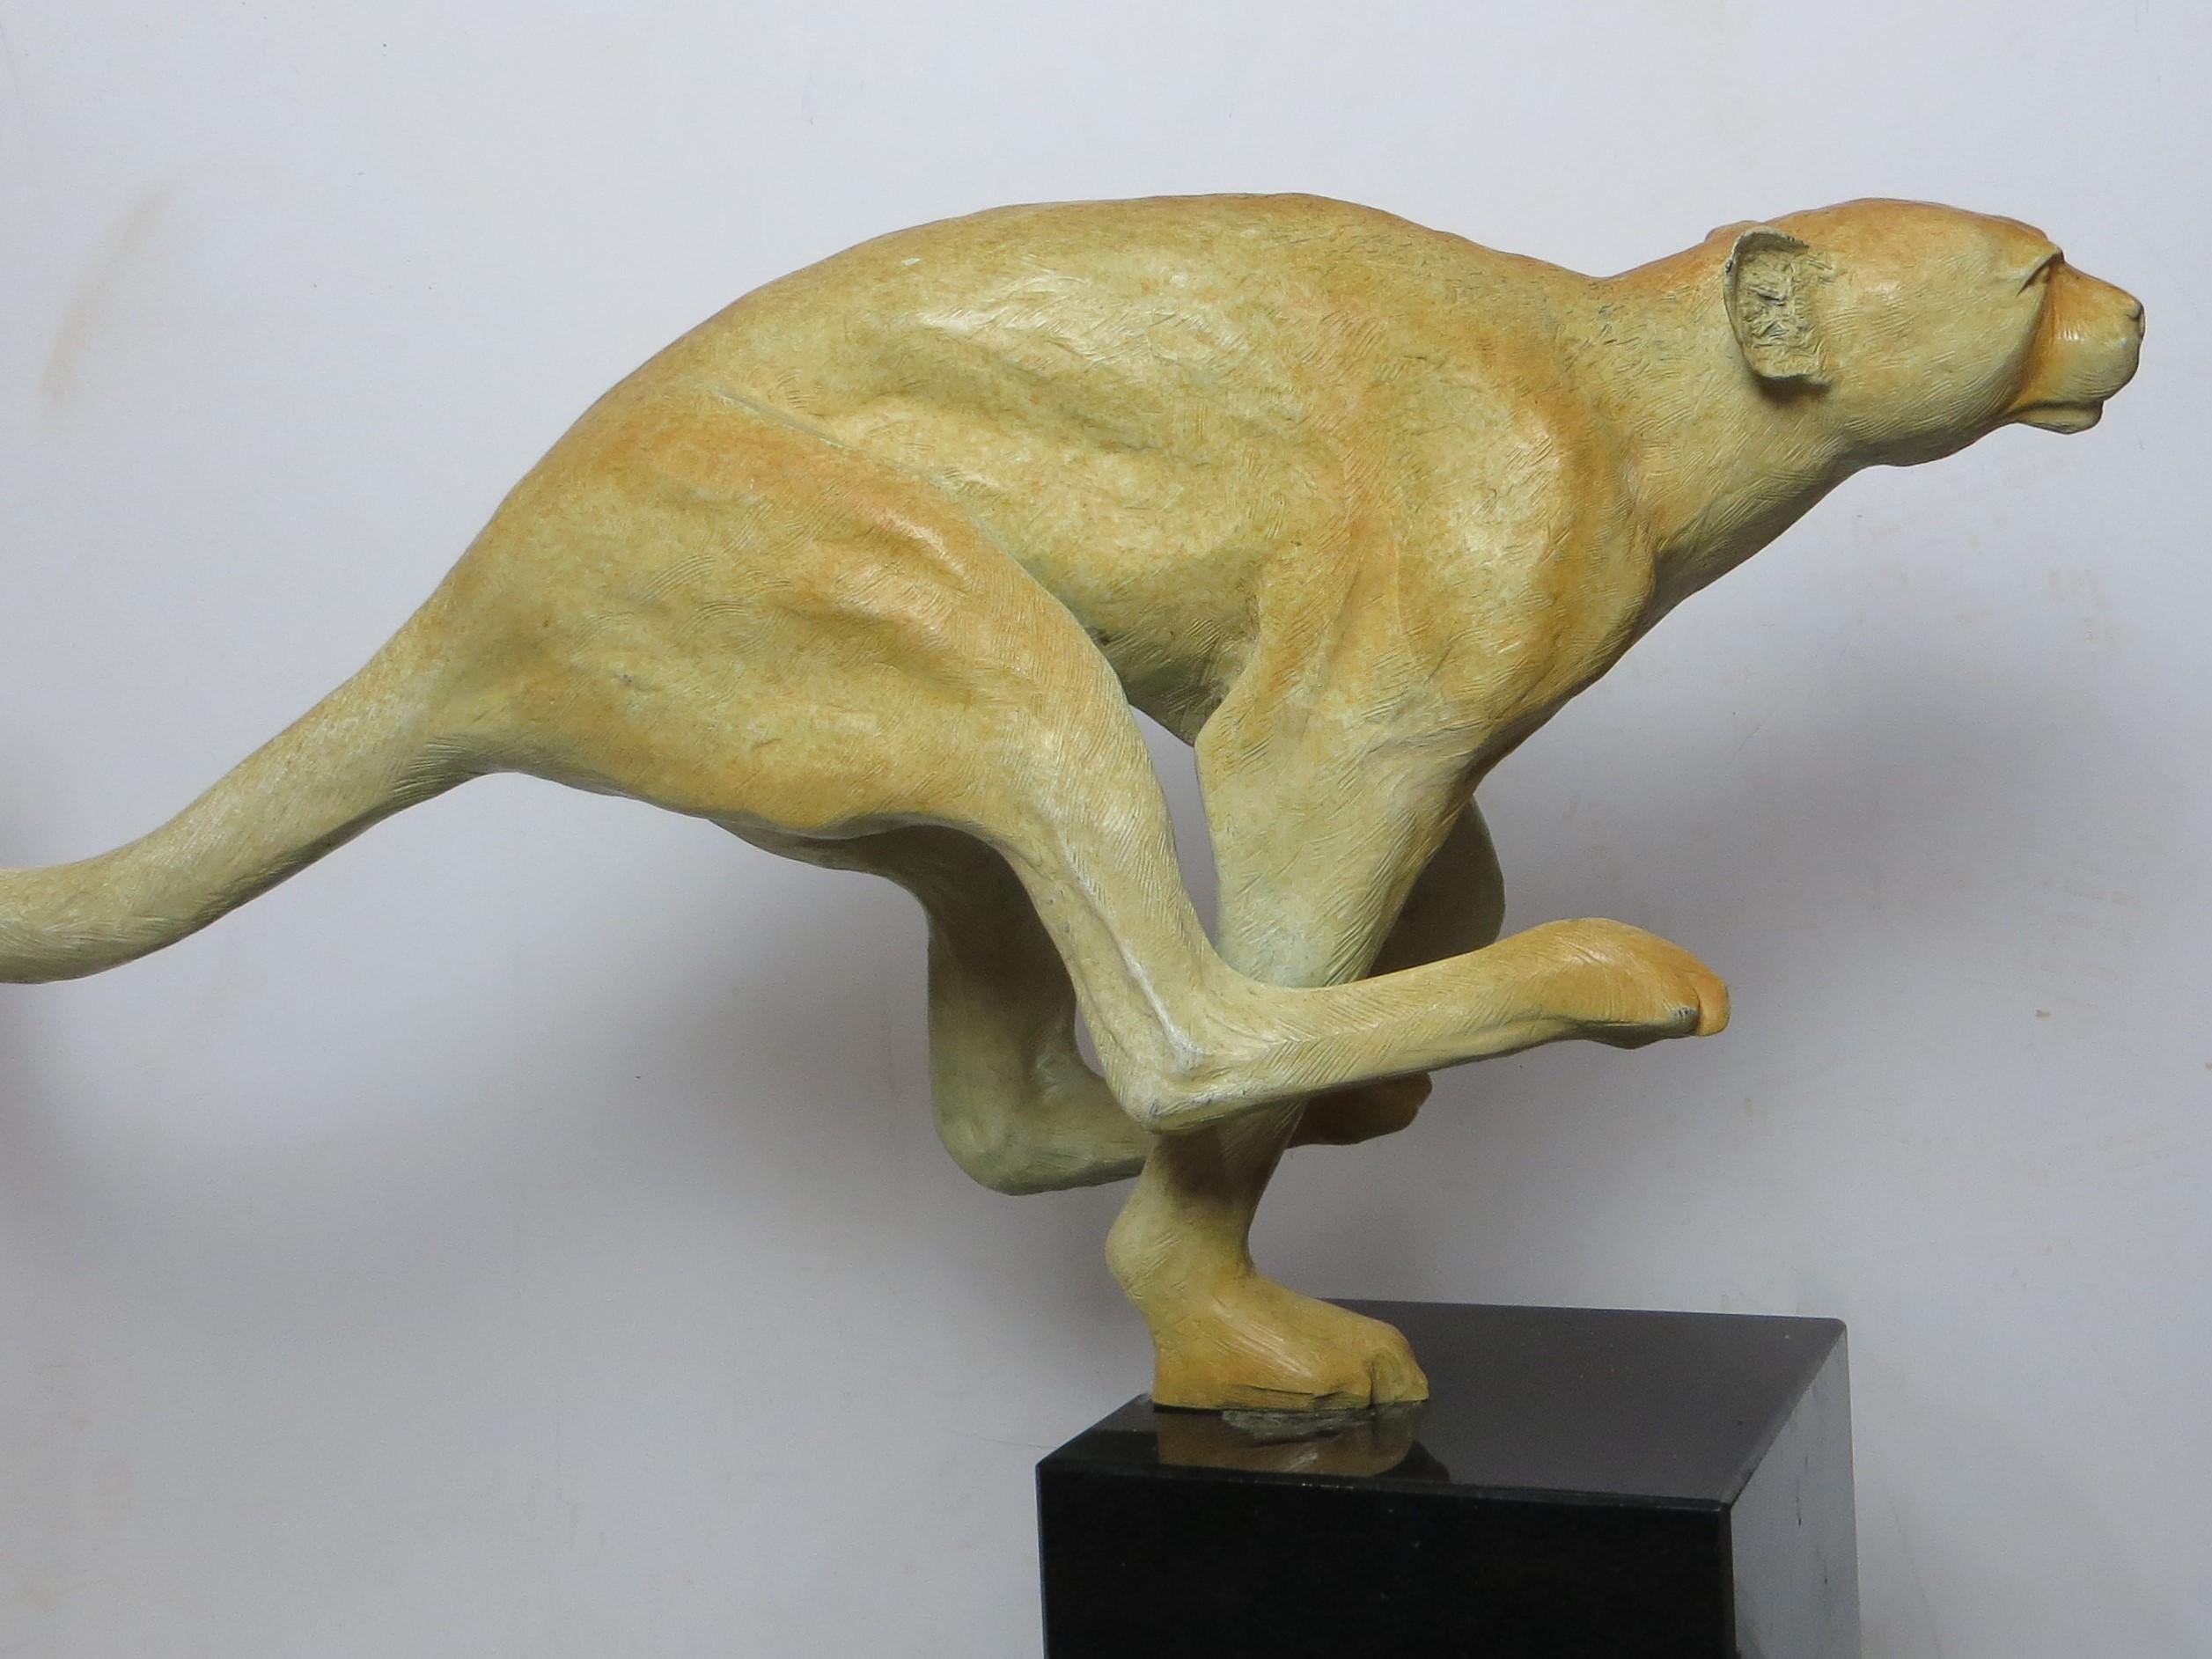 the sculptor ( We can't read the name ) is a passionate animal sculptor. It progresses with more and more important works and groups of moving animals (lions, cheetahs, bears, wolves, wild boars ...)
   One feels in front of his very expressionist